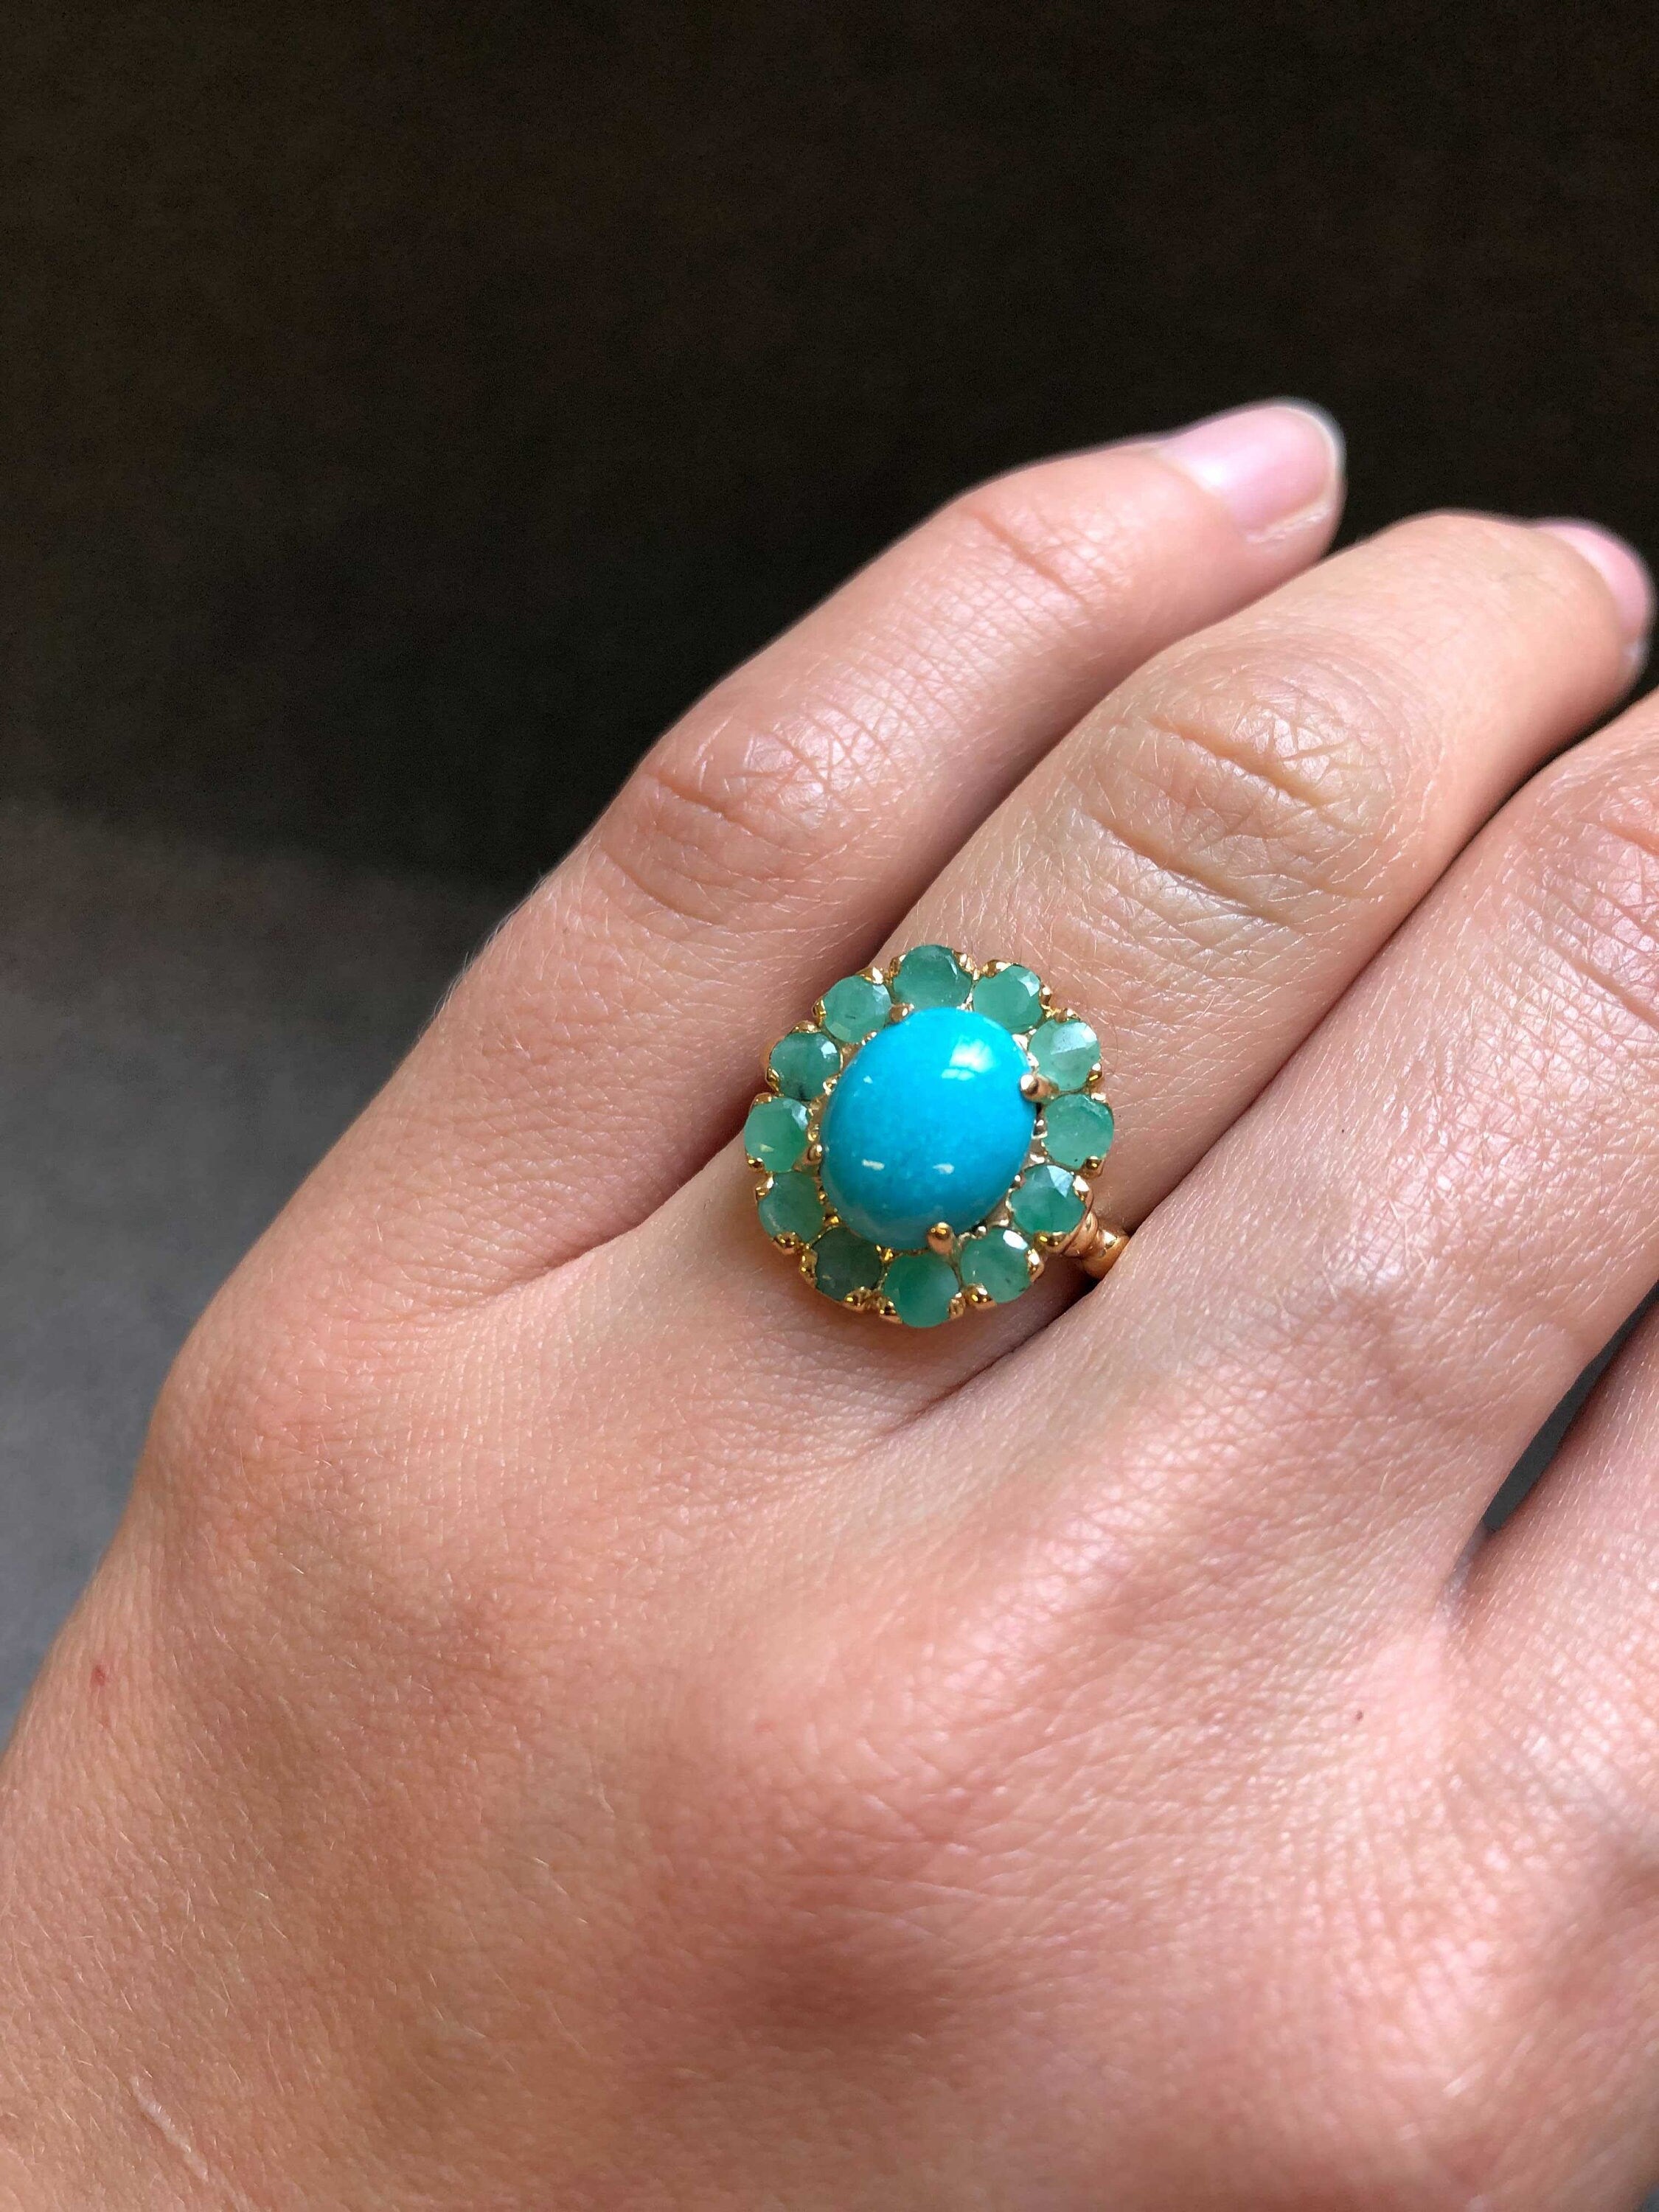 Gold Turquoise Ring, Victorian Ring, Natural Turquoise, Gold Flower Ring, Antique Ring, Turquoise Ring, 3 Carat Ring, Emerald Ring, Vermeil